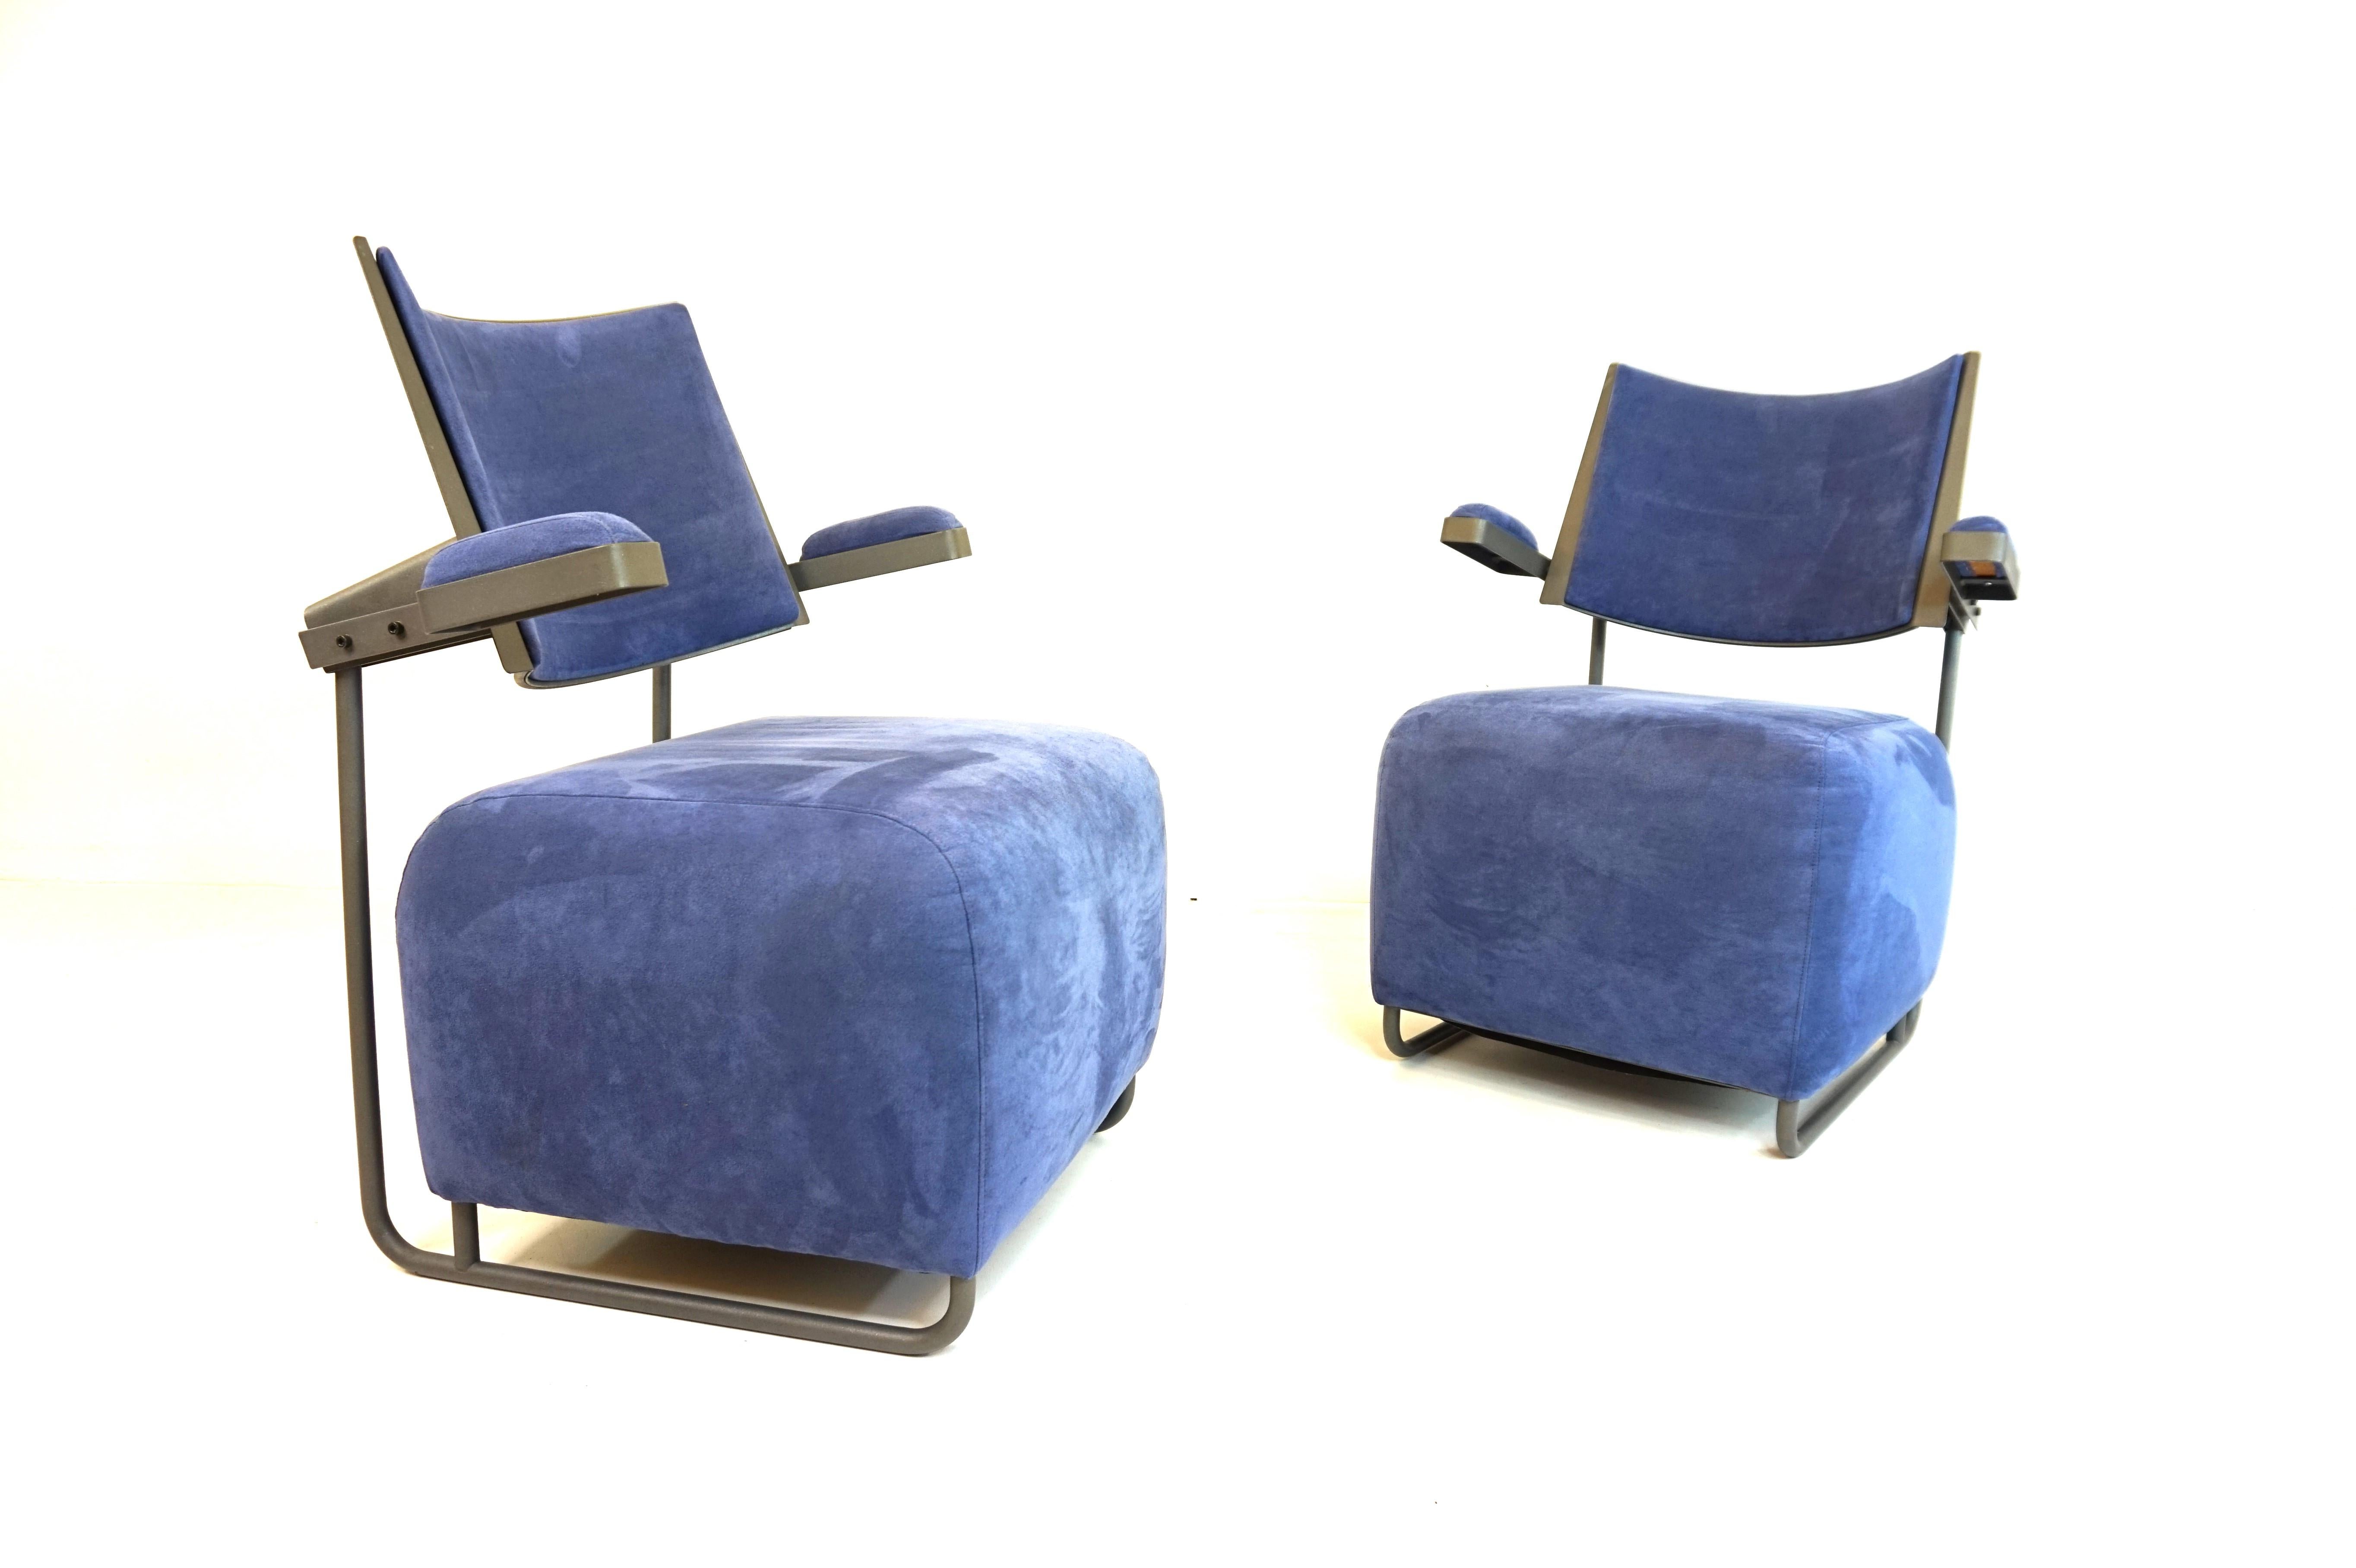 The Oscar set comes in blue Alcantara covers with light gray powdered metal frames. The Alcantara covers show minimal signs of wear, as do the metal frames. The seating comfort on both lounge chairs is impeccable and the swinging backrest offers a